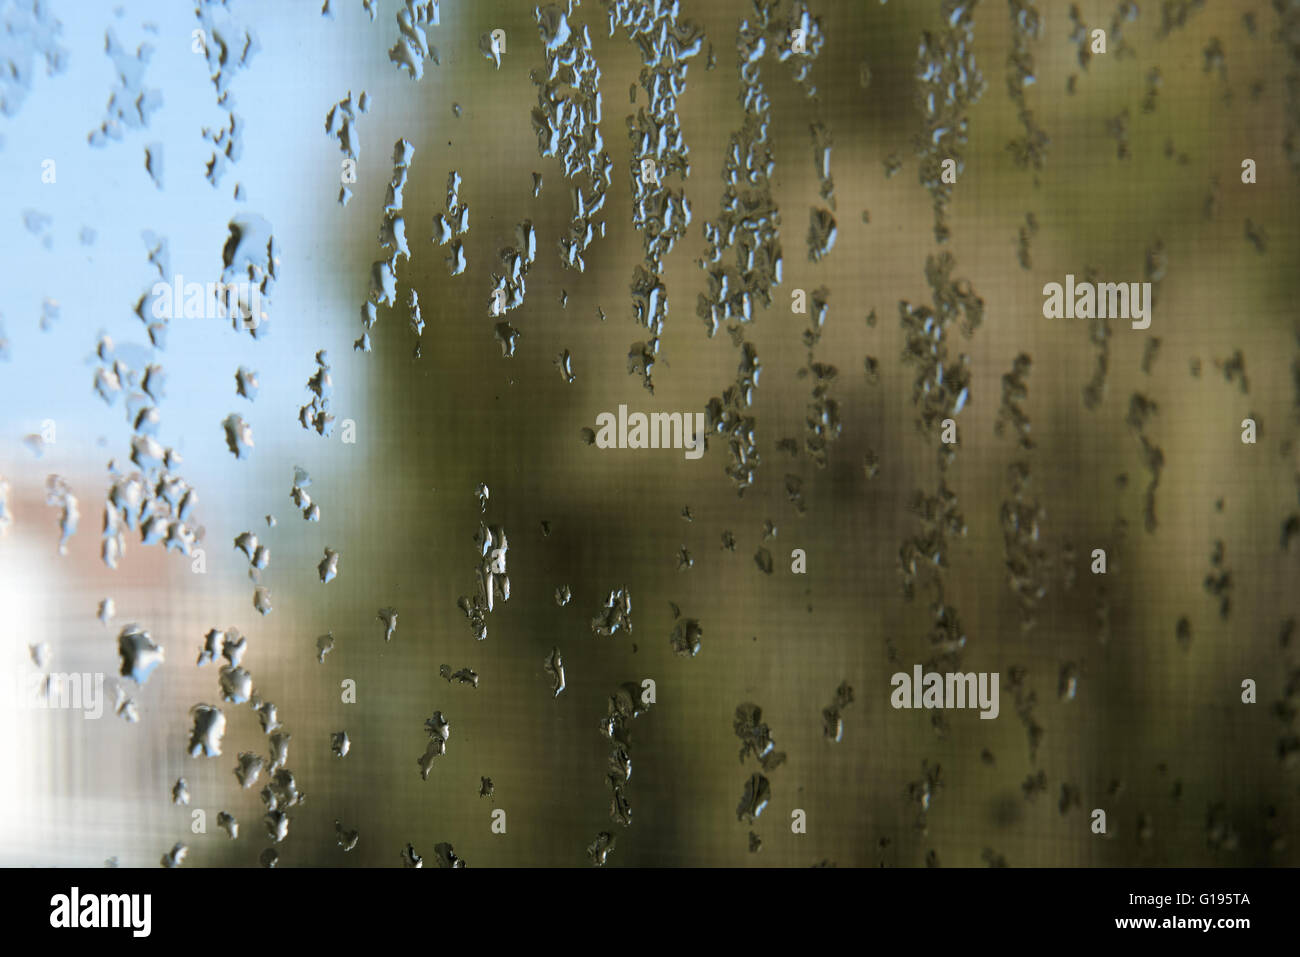 Condensation on a window pane with blurry background Stock Photo